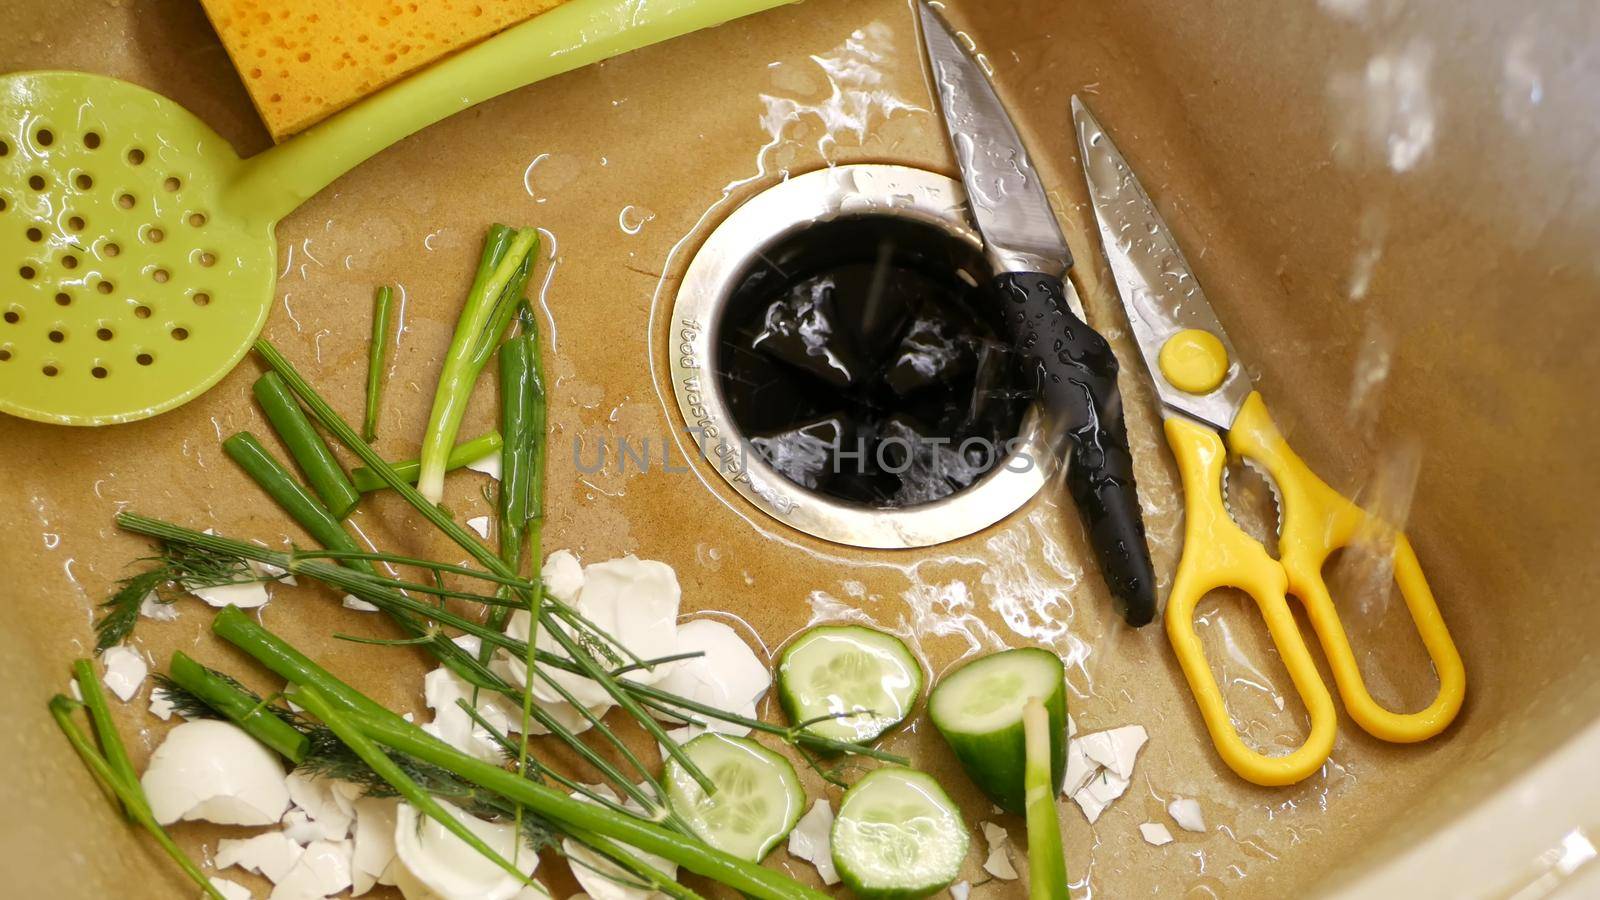 Organic garbage in sink with built-in food waste disposer. vegetable or fruits peels, remains and leftovers and disposal grinder. Zero waste, sustainable development and garbage separation concept.